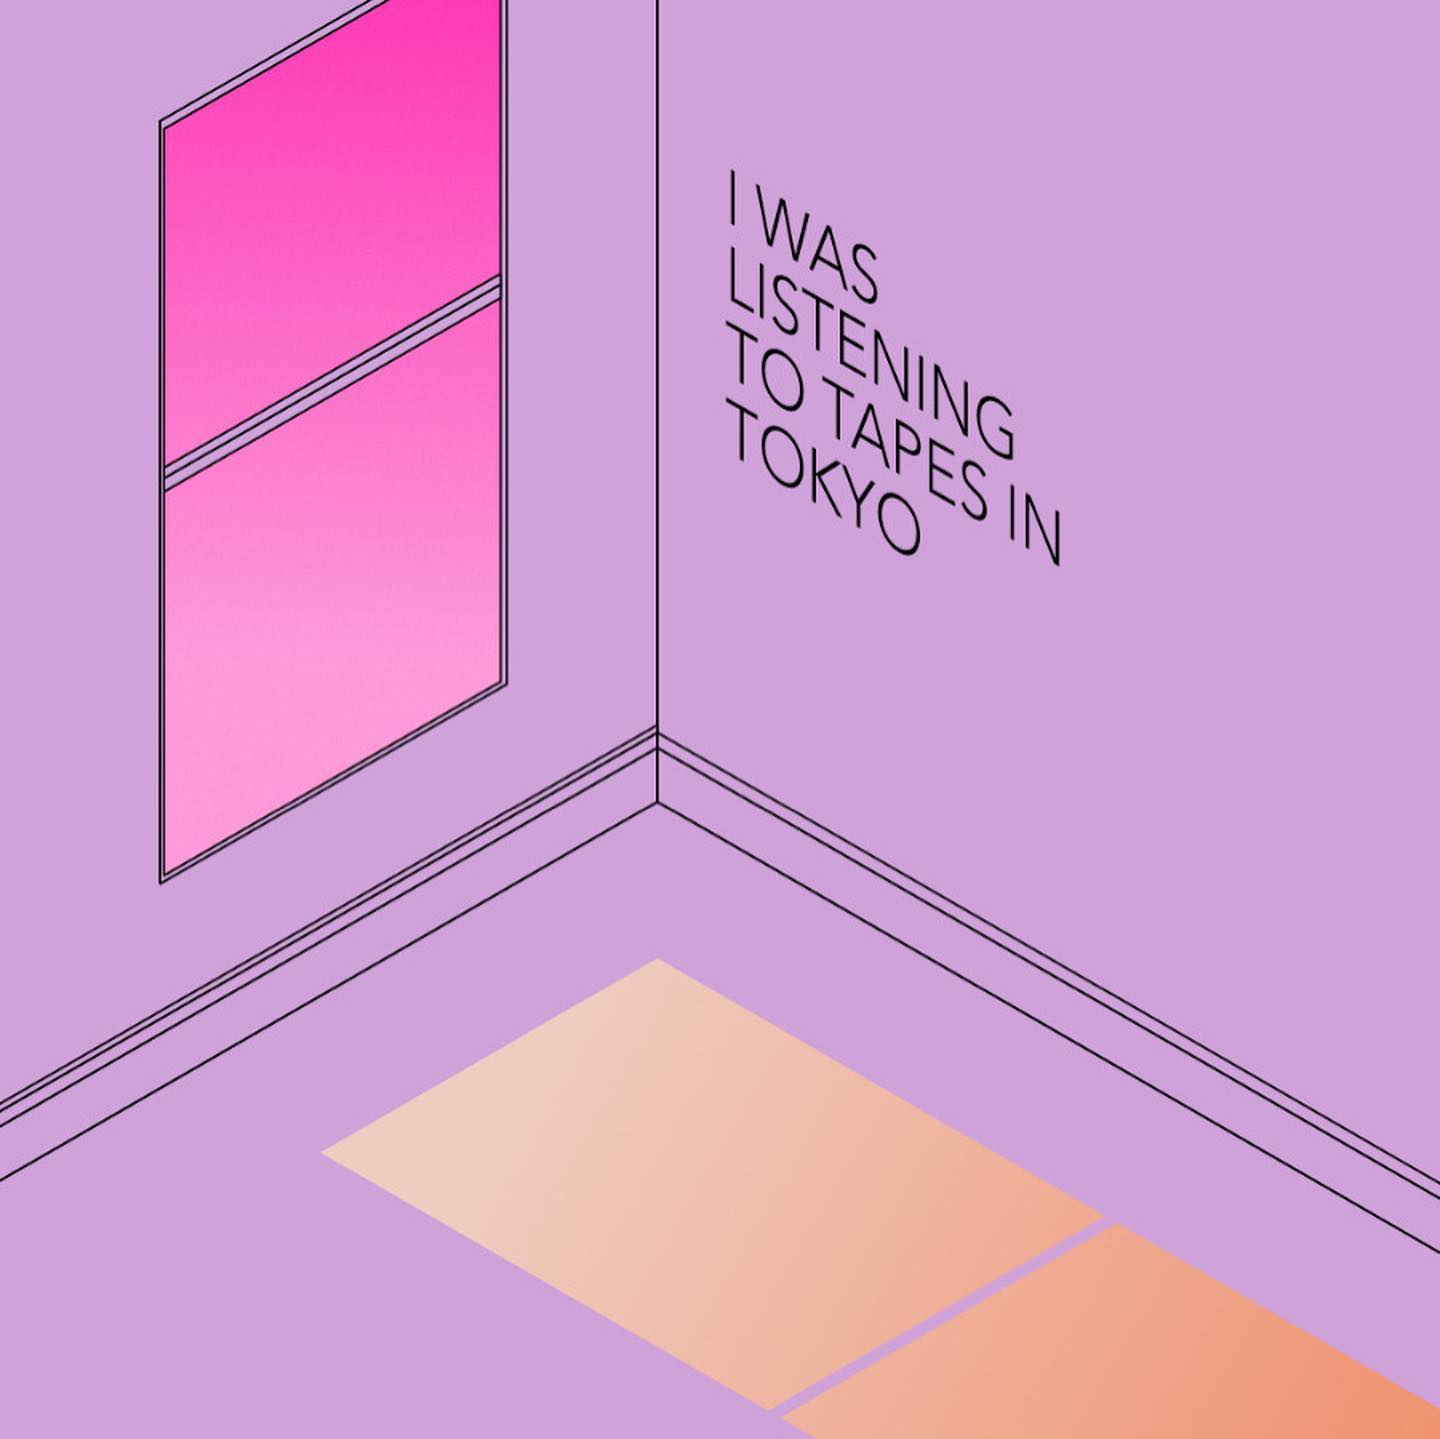 WINDOWED – I Was Listening To Tapes In Tokyo